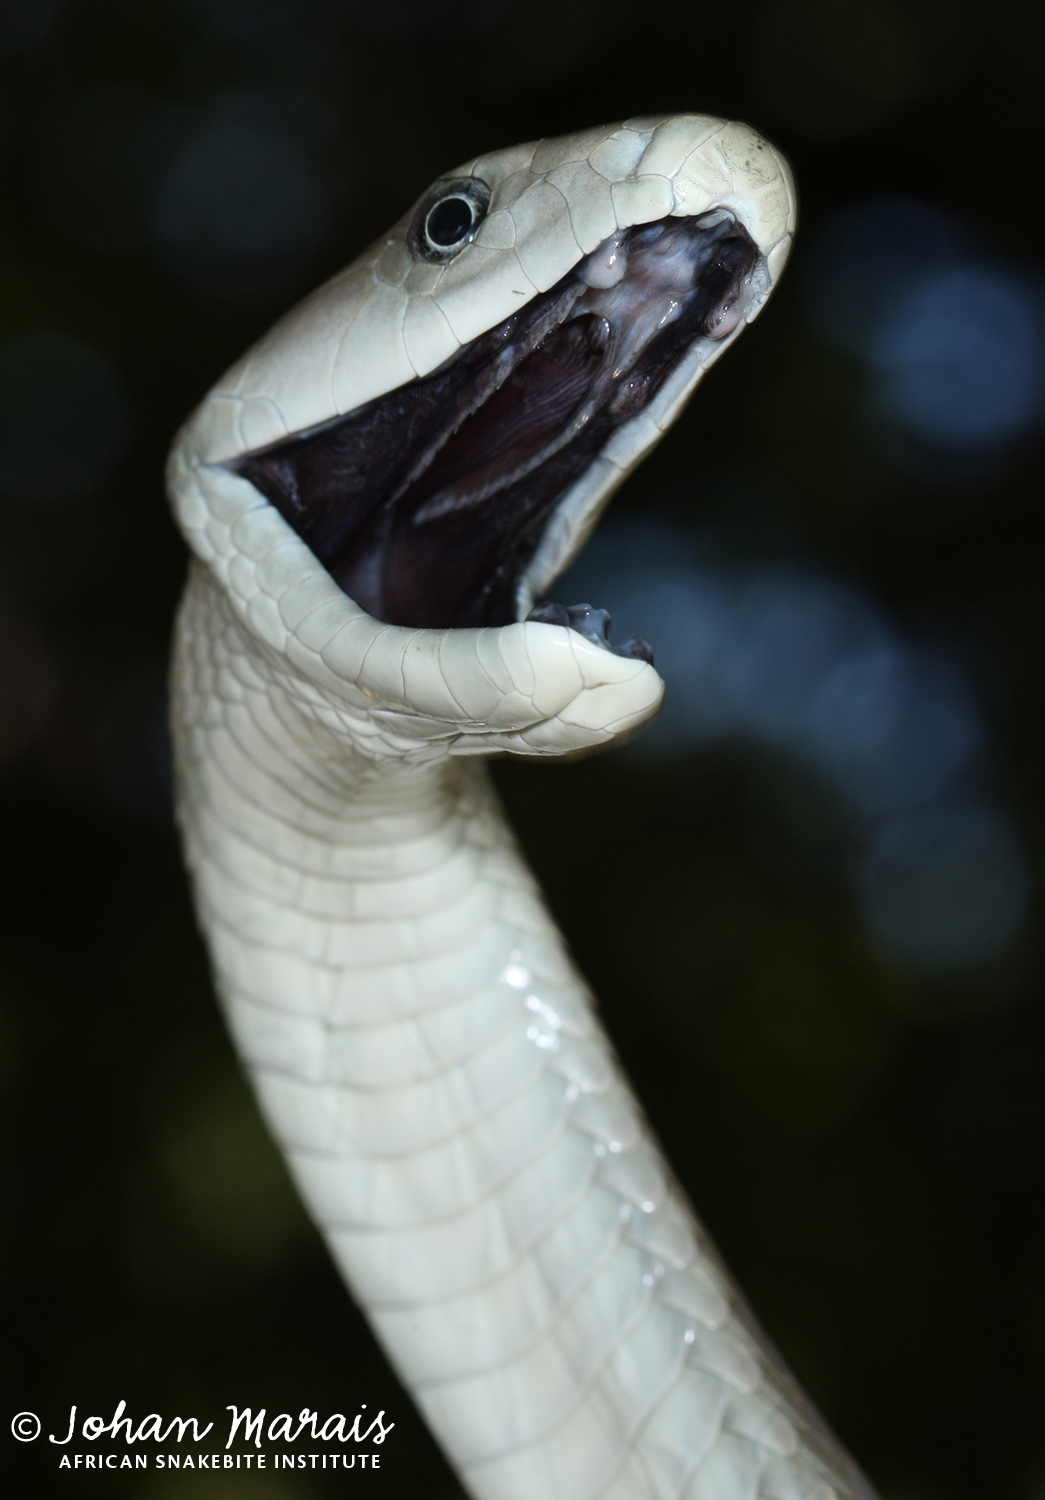 True facts about the Black Mamba - African Snakebite Institute